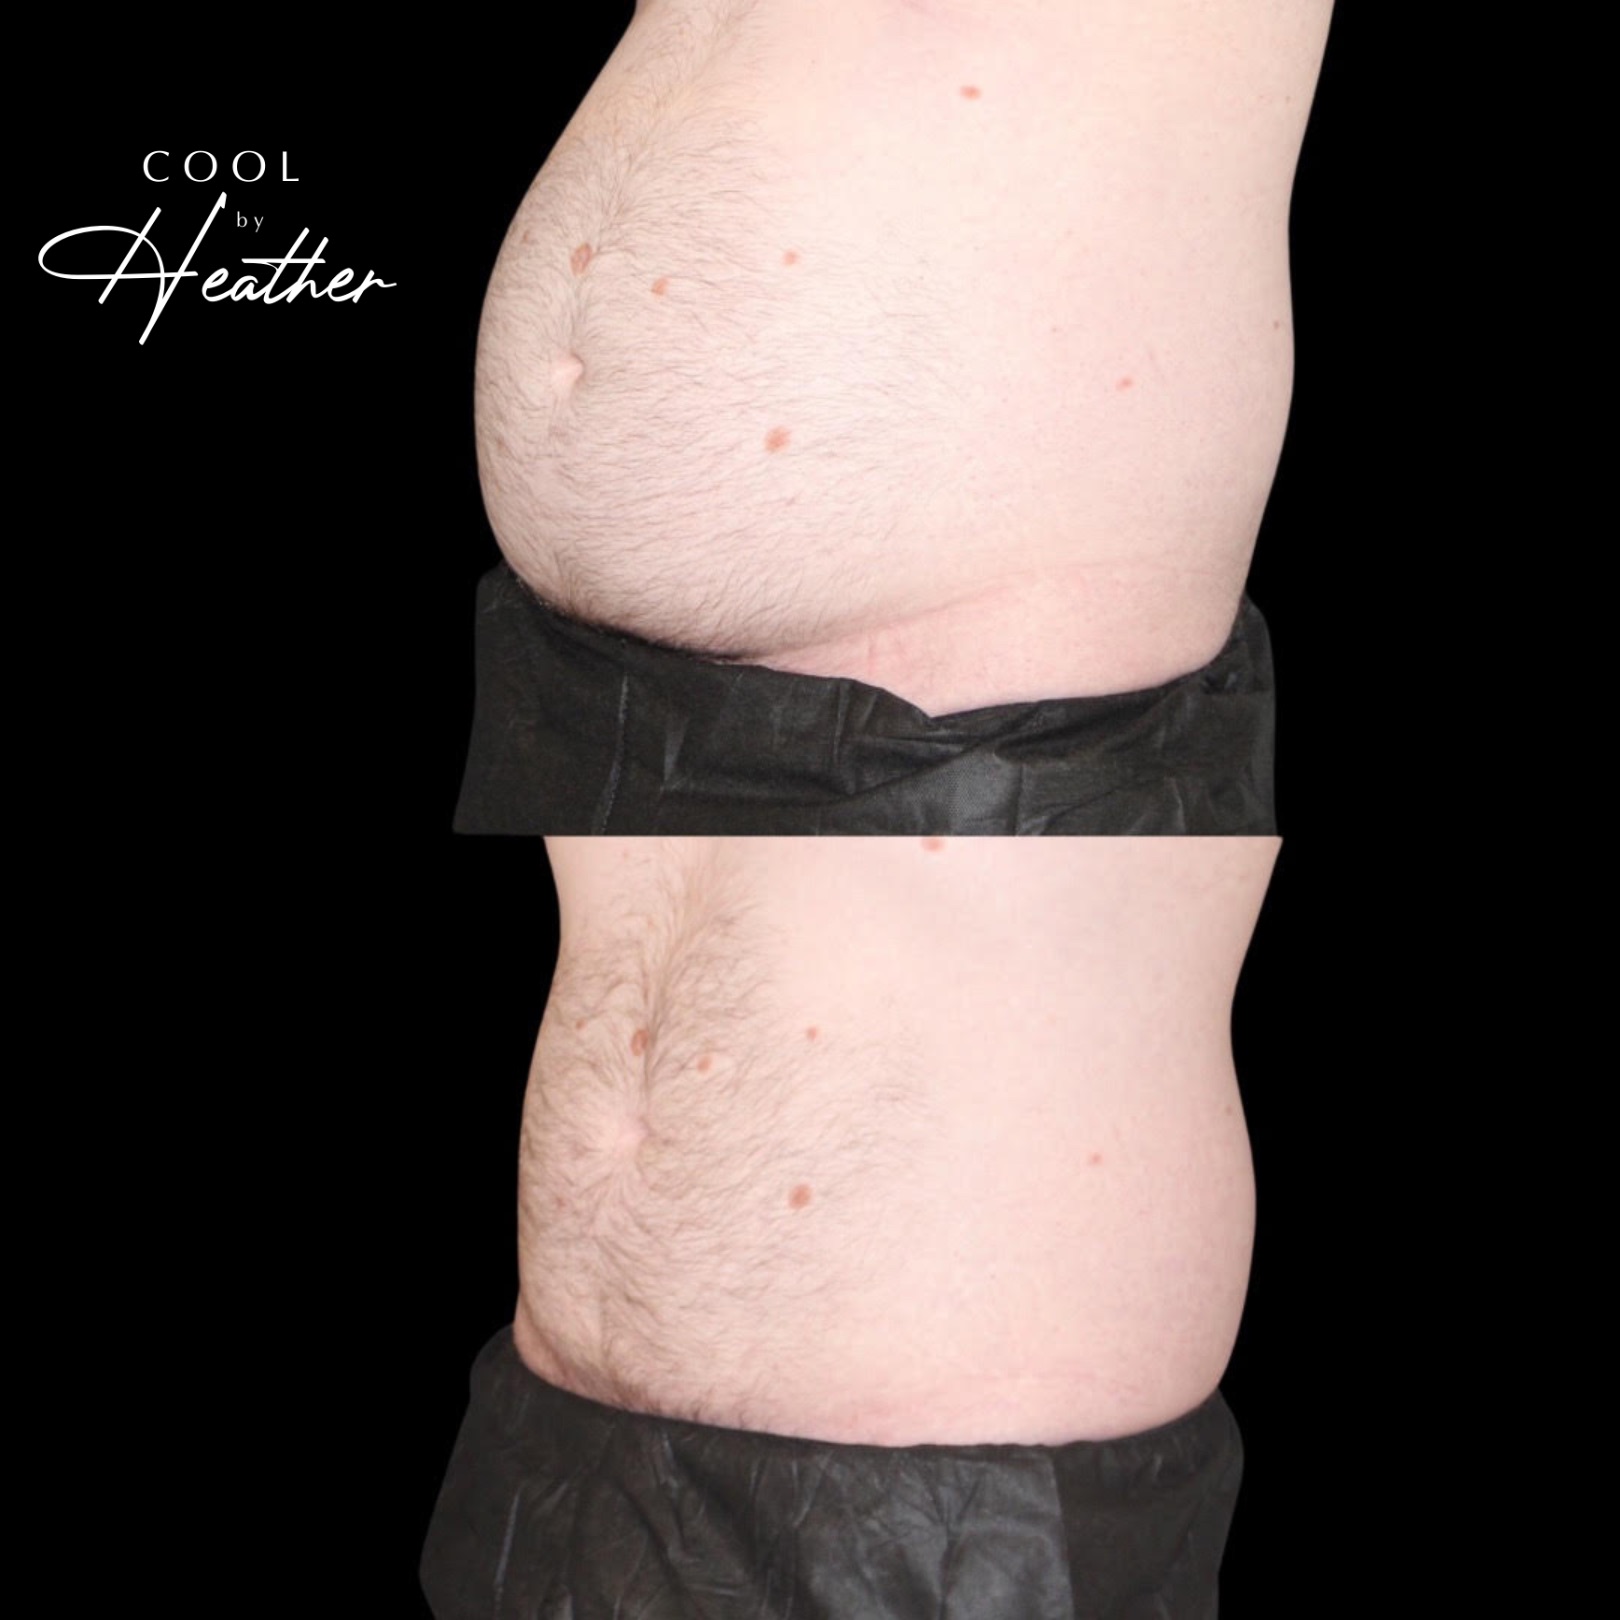 An abdomen of man before and after treatment